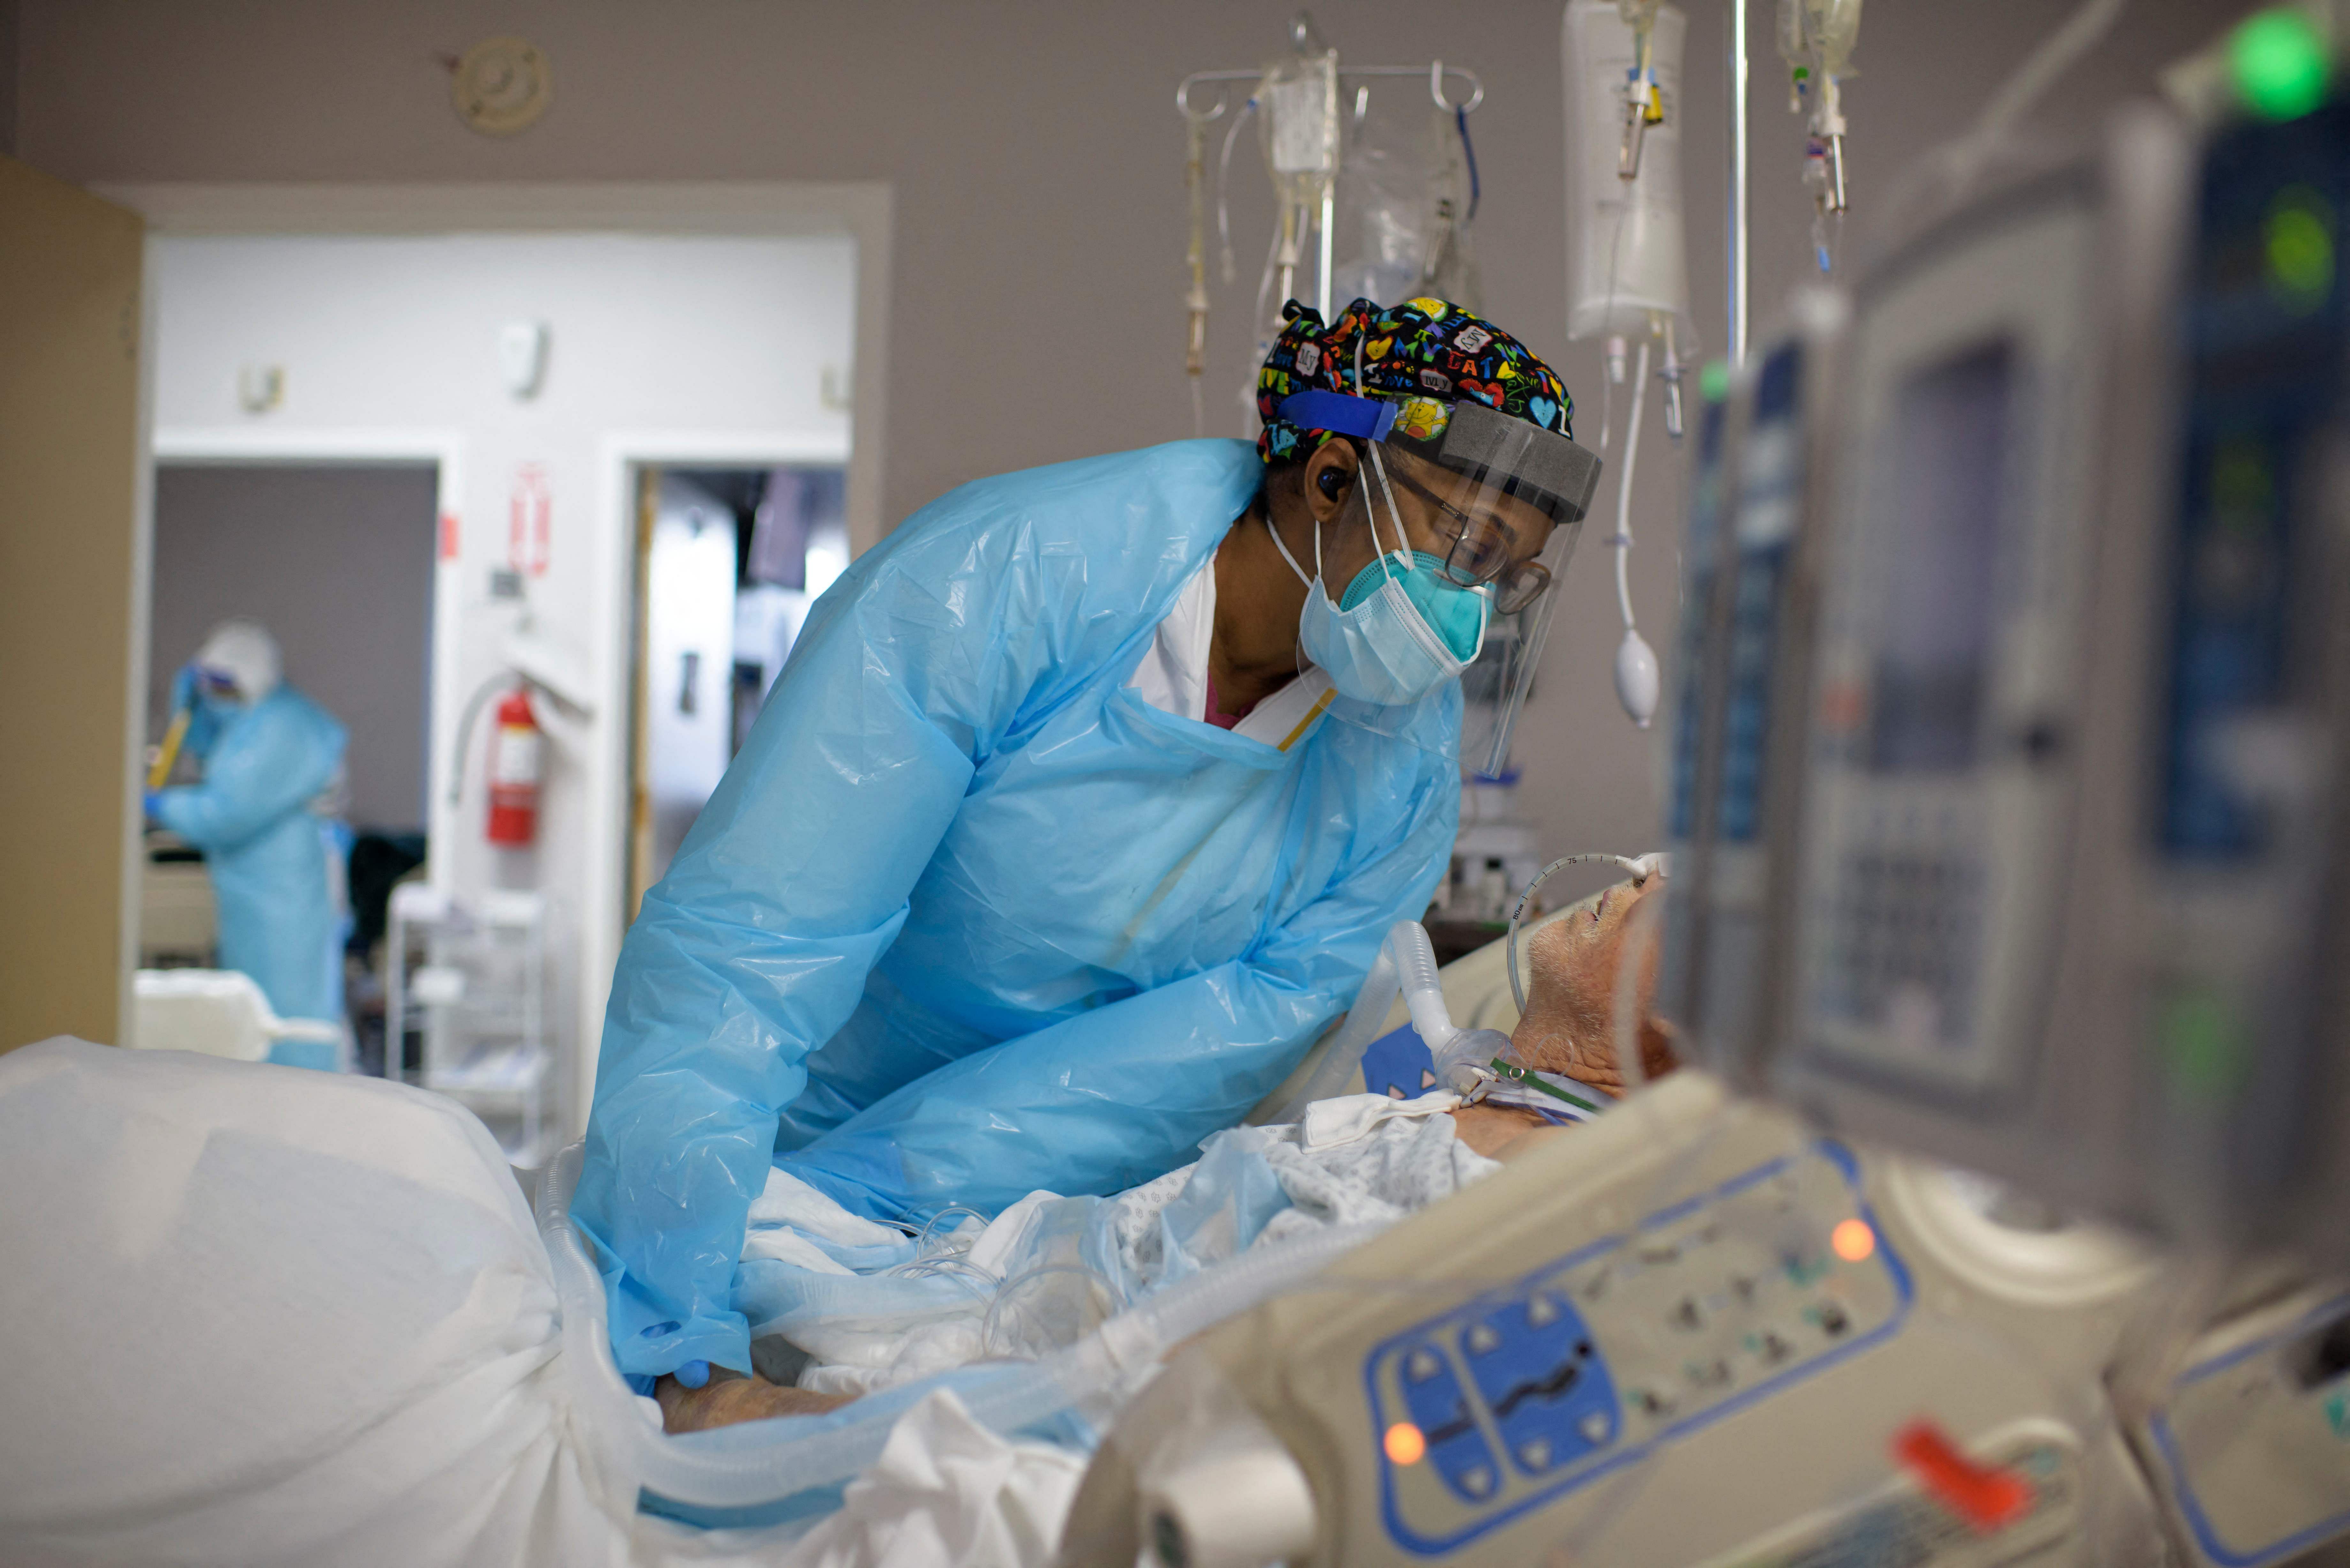 Healthcare worker Demetra Ransom comforts a patient in the Covid-19 ward. Credit: AFP Photo